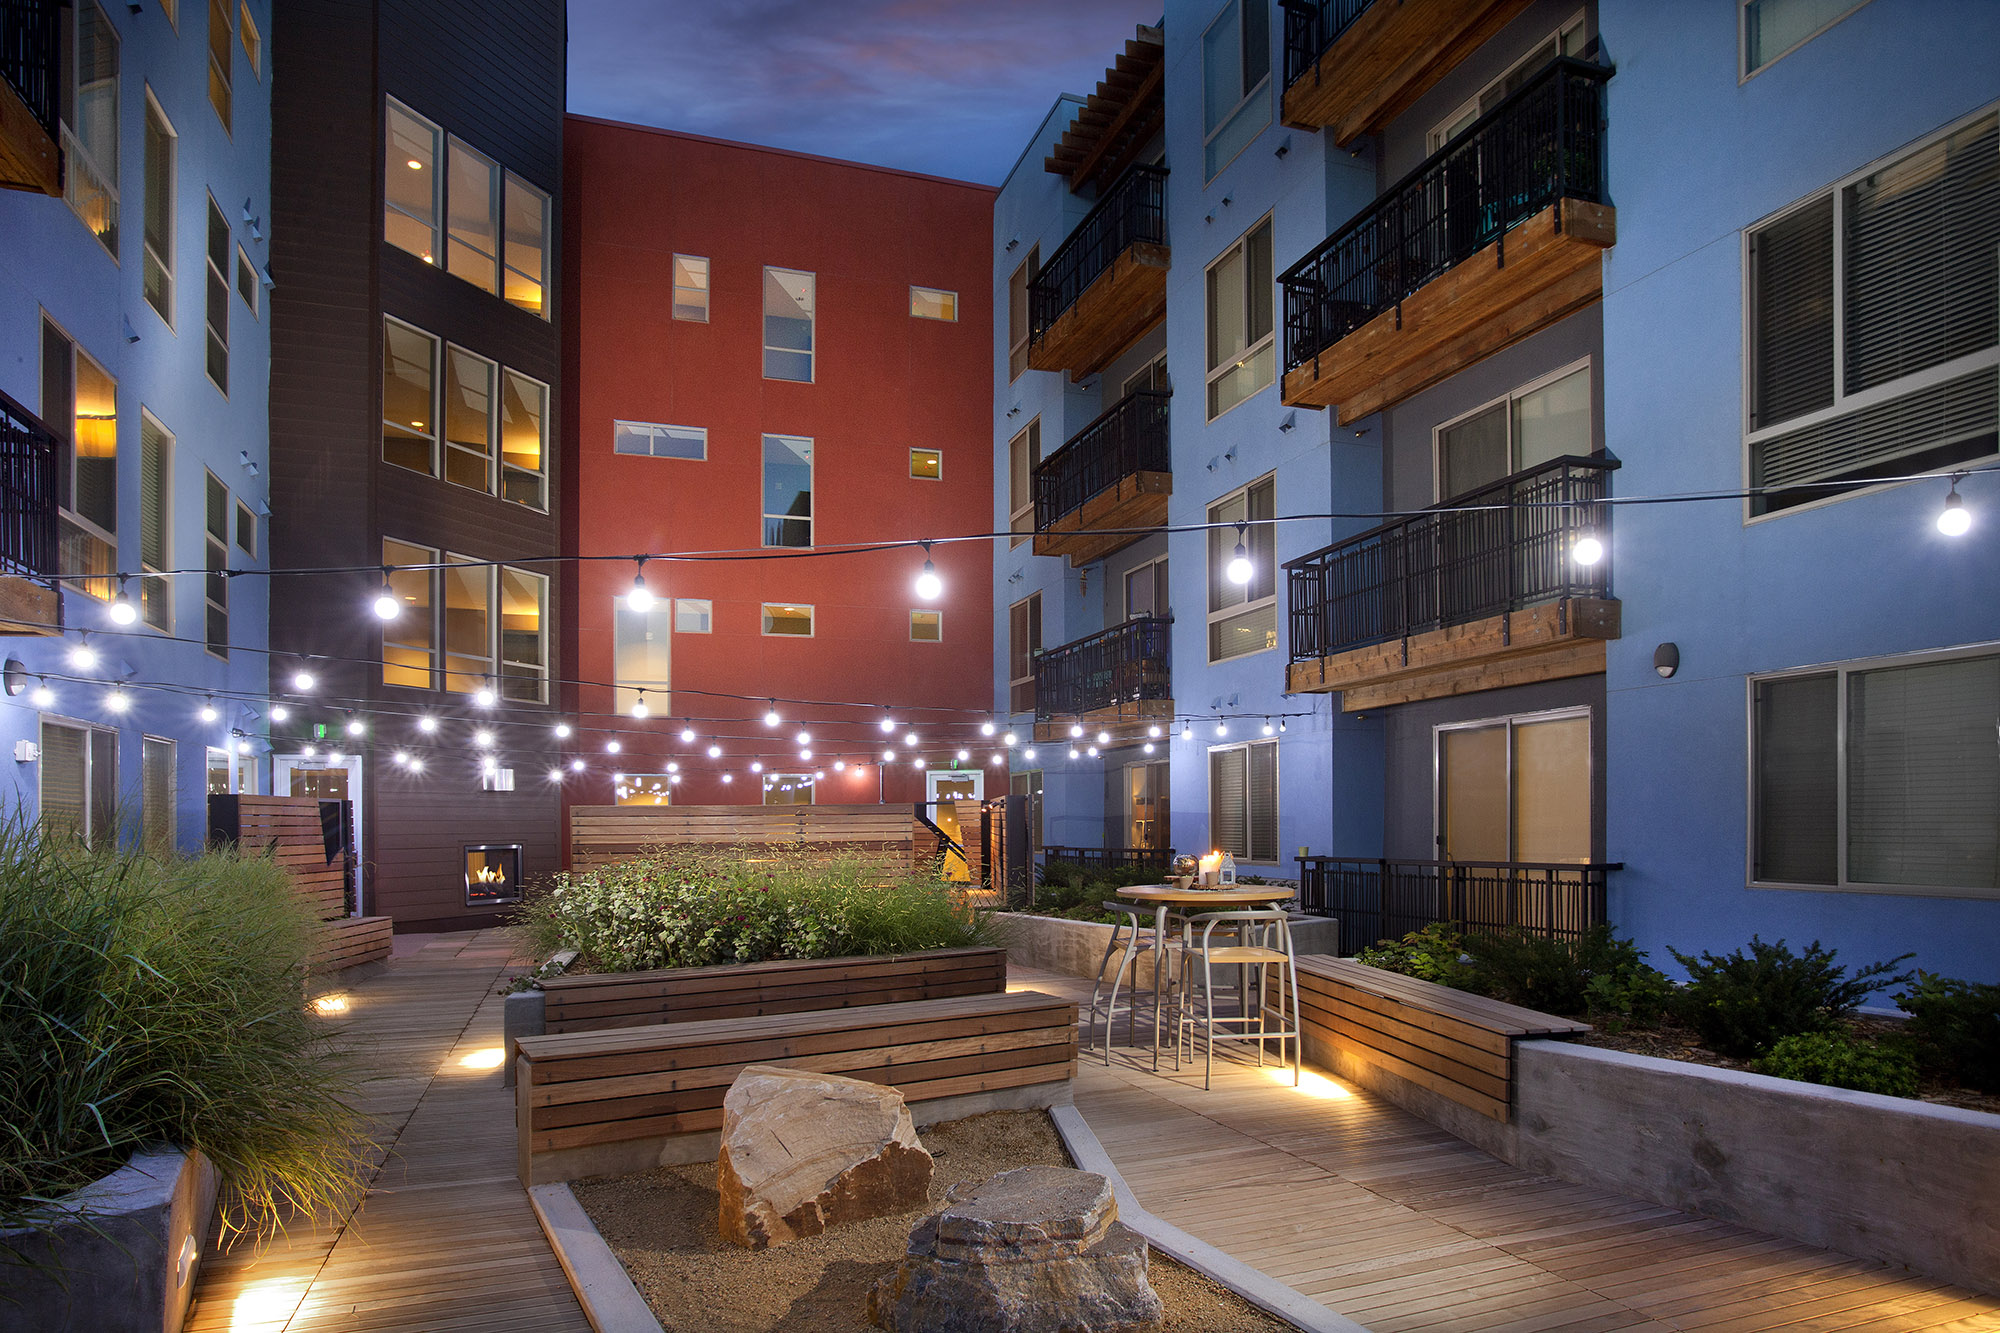 Apartment balconies overlooking Courtyard with festoon lights, benches, planters, boulders and seating